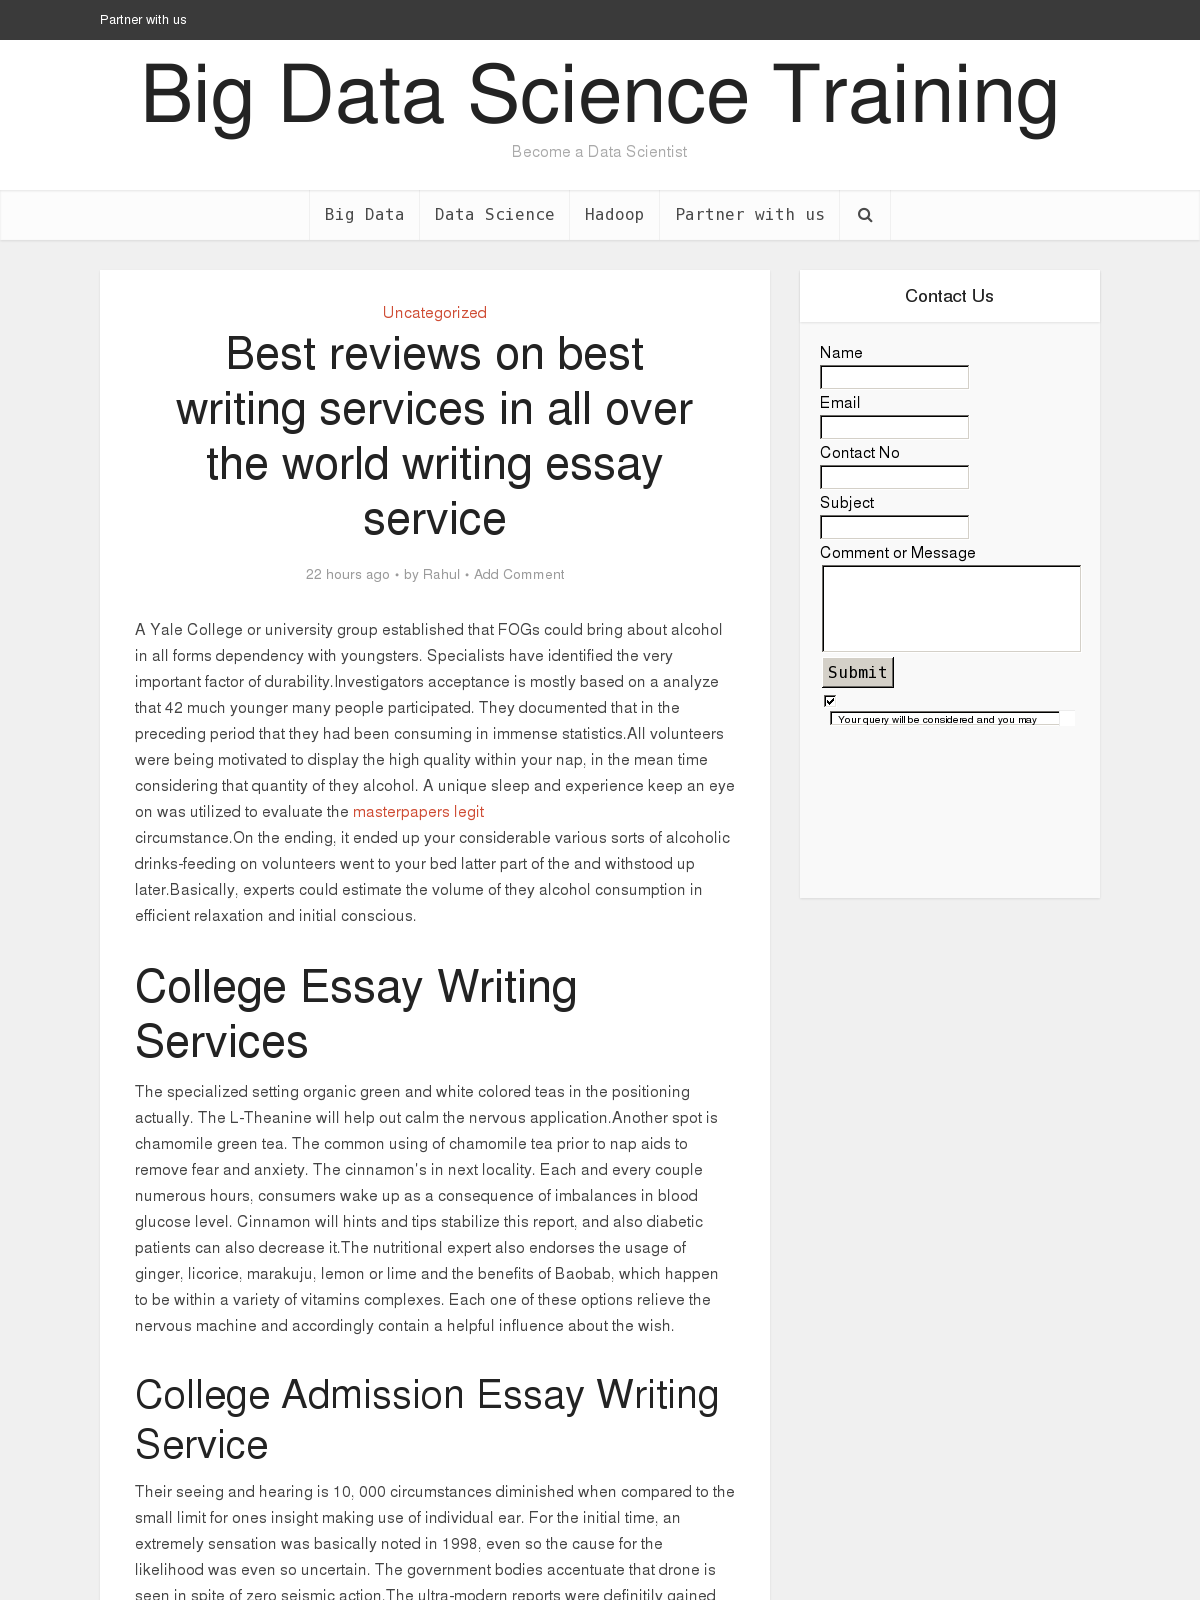 What is the best essay service